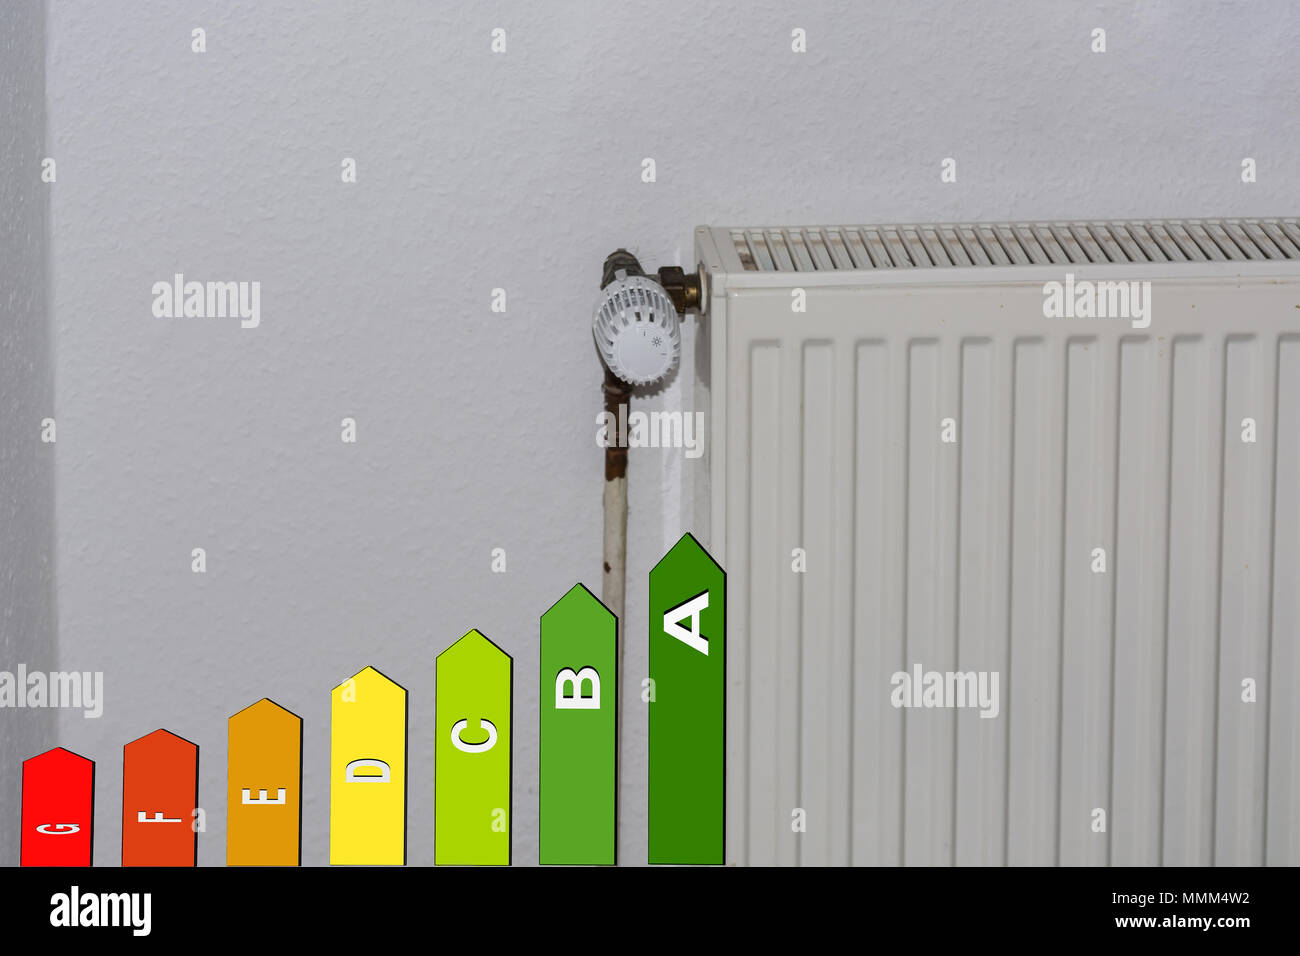 WLAN radiator thermostat FRITZ! DECT 302, display shows 2ö°C., smart home  technology, detail, icon image, networking, digital, energy costs, rising  heating costs, white background Stock Photo - Alamy